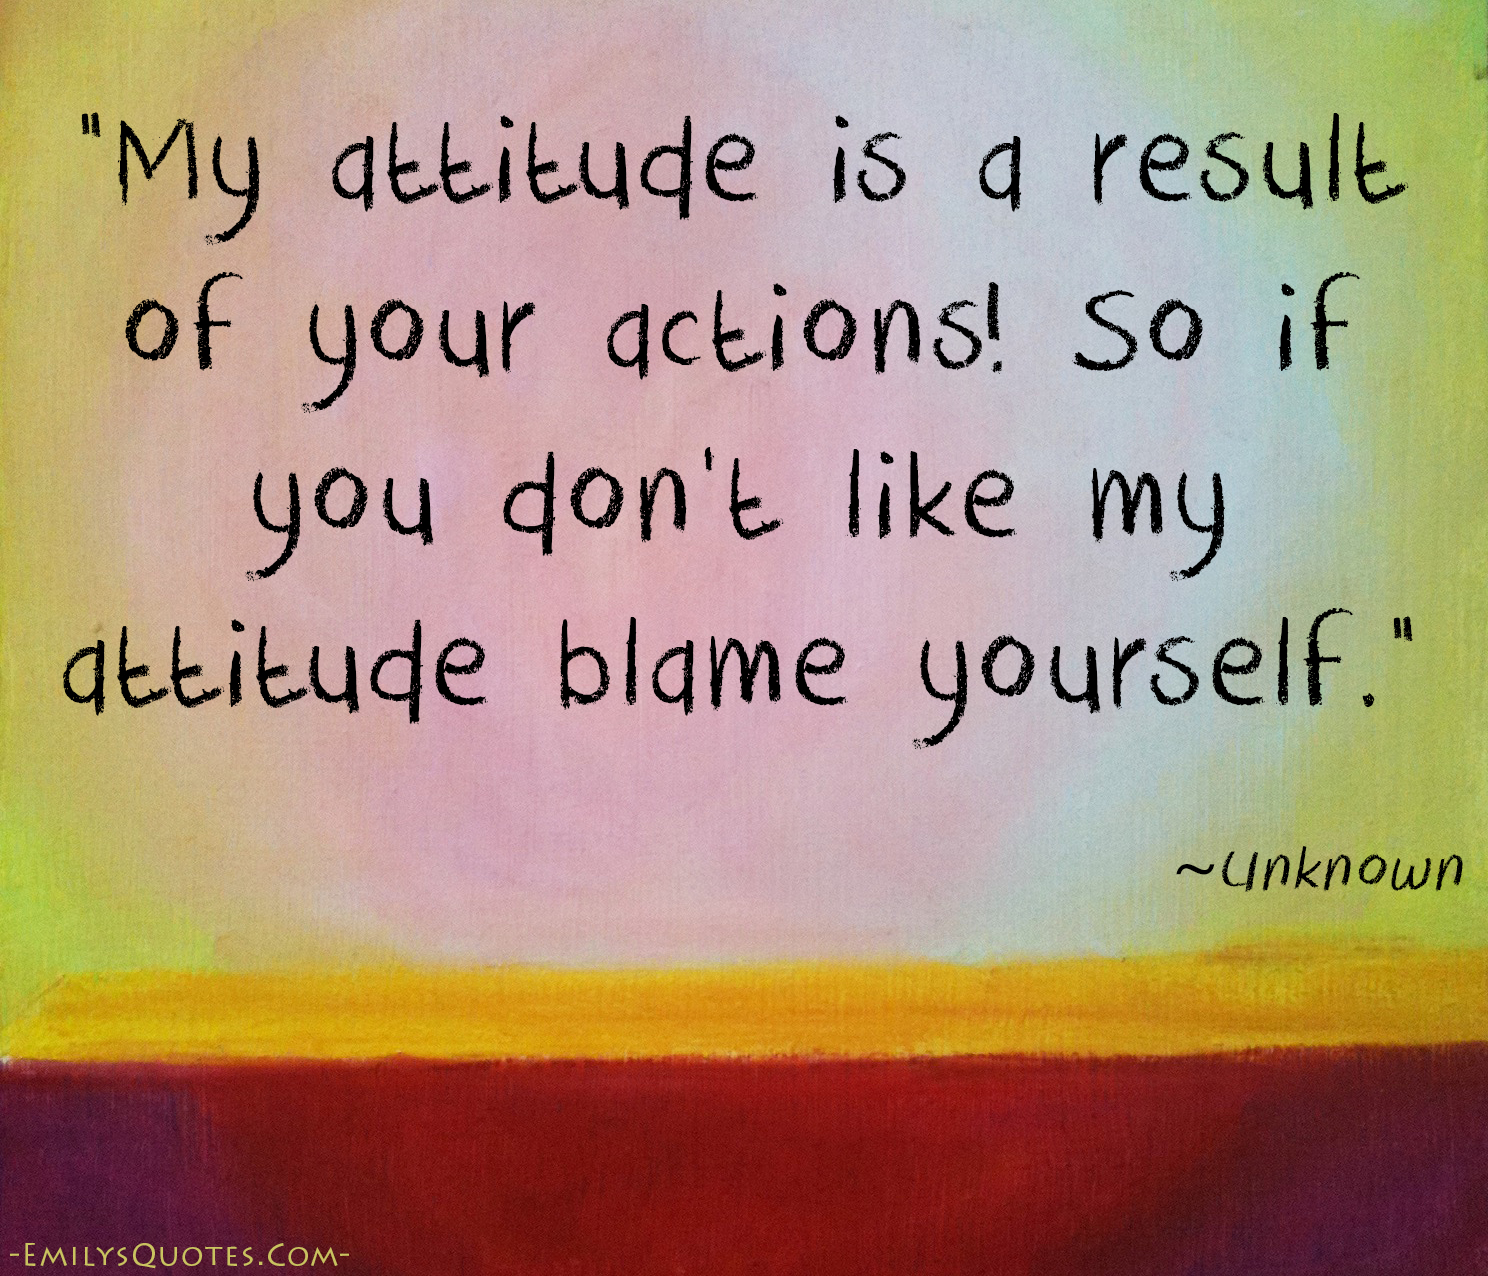 My attitude is a result of your actions! So if you don’t like my attitude blame yourself